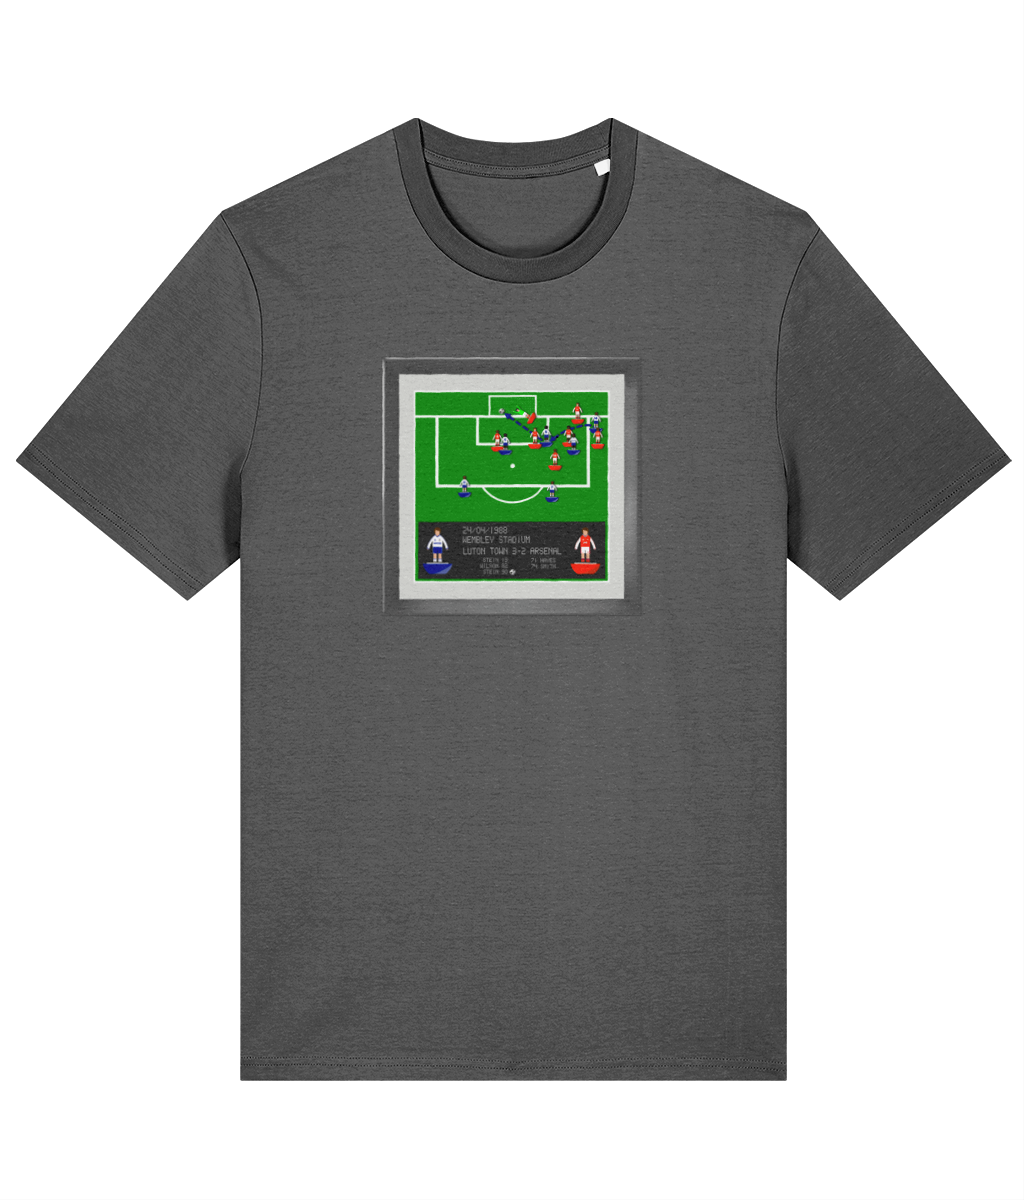 Football Iconic Moments 'Stein - LUTON TOWN v Arsenal 1988' Unisex T-Shirt